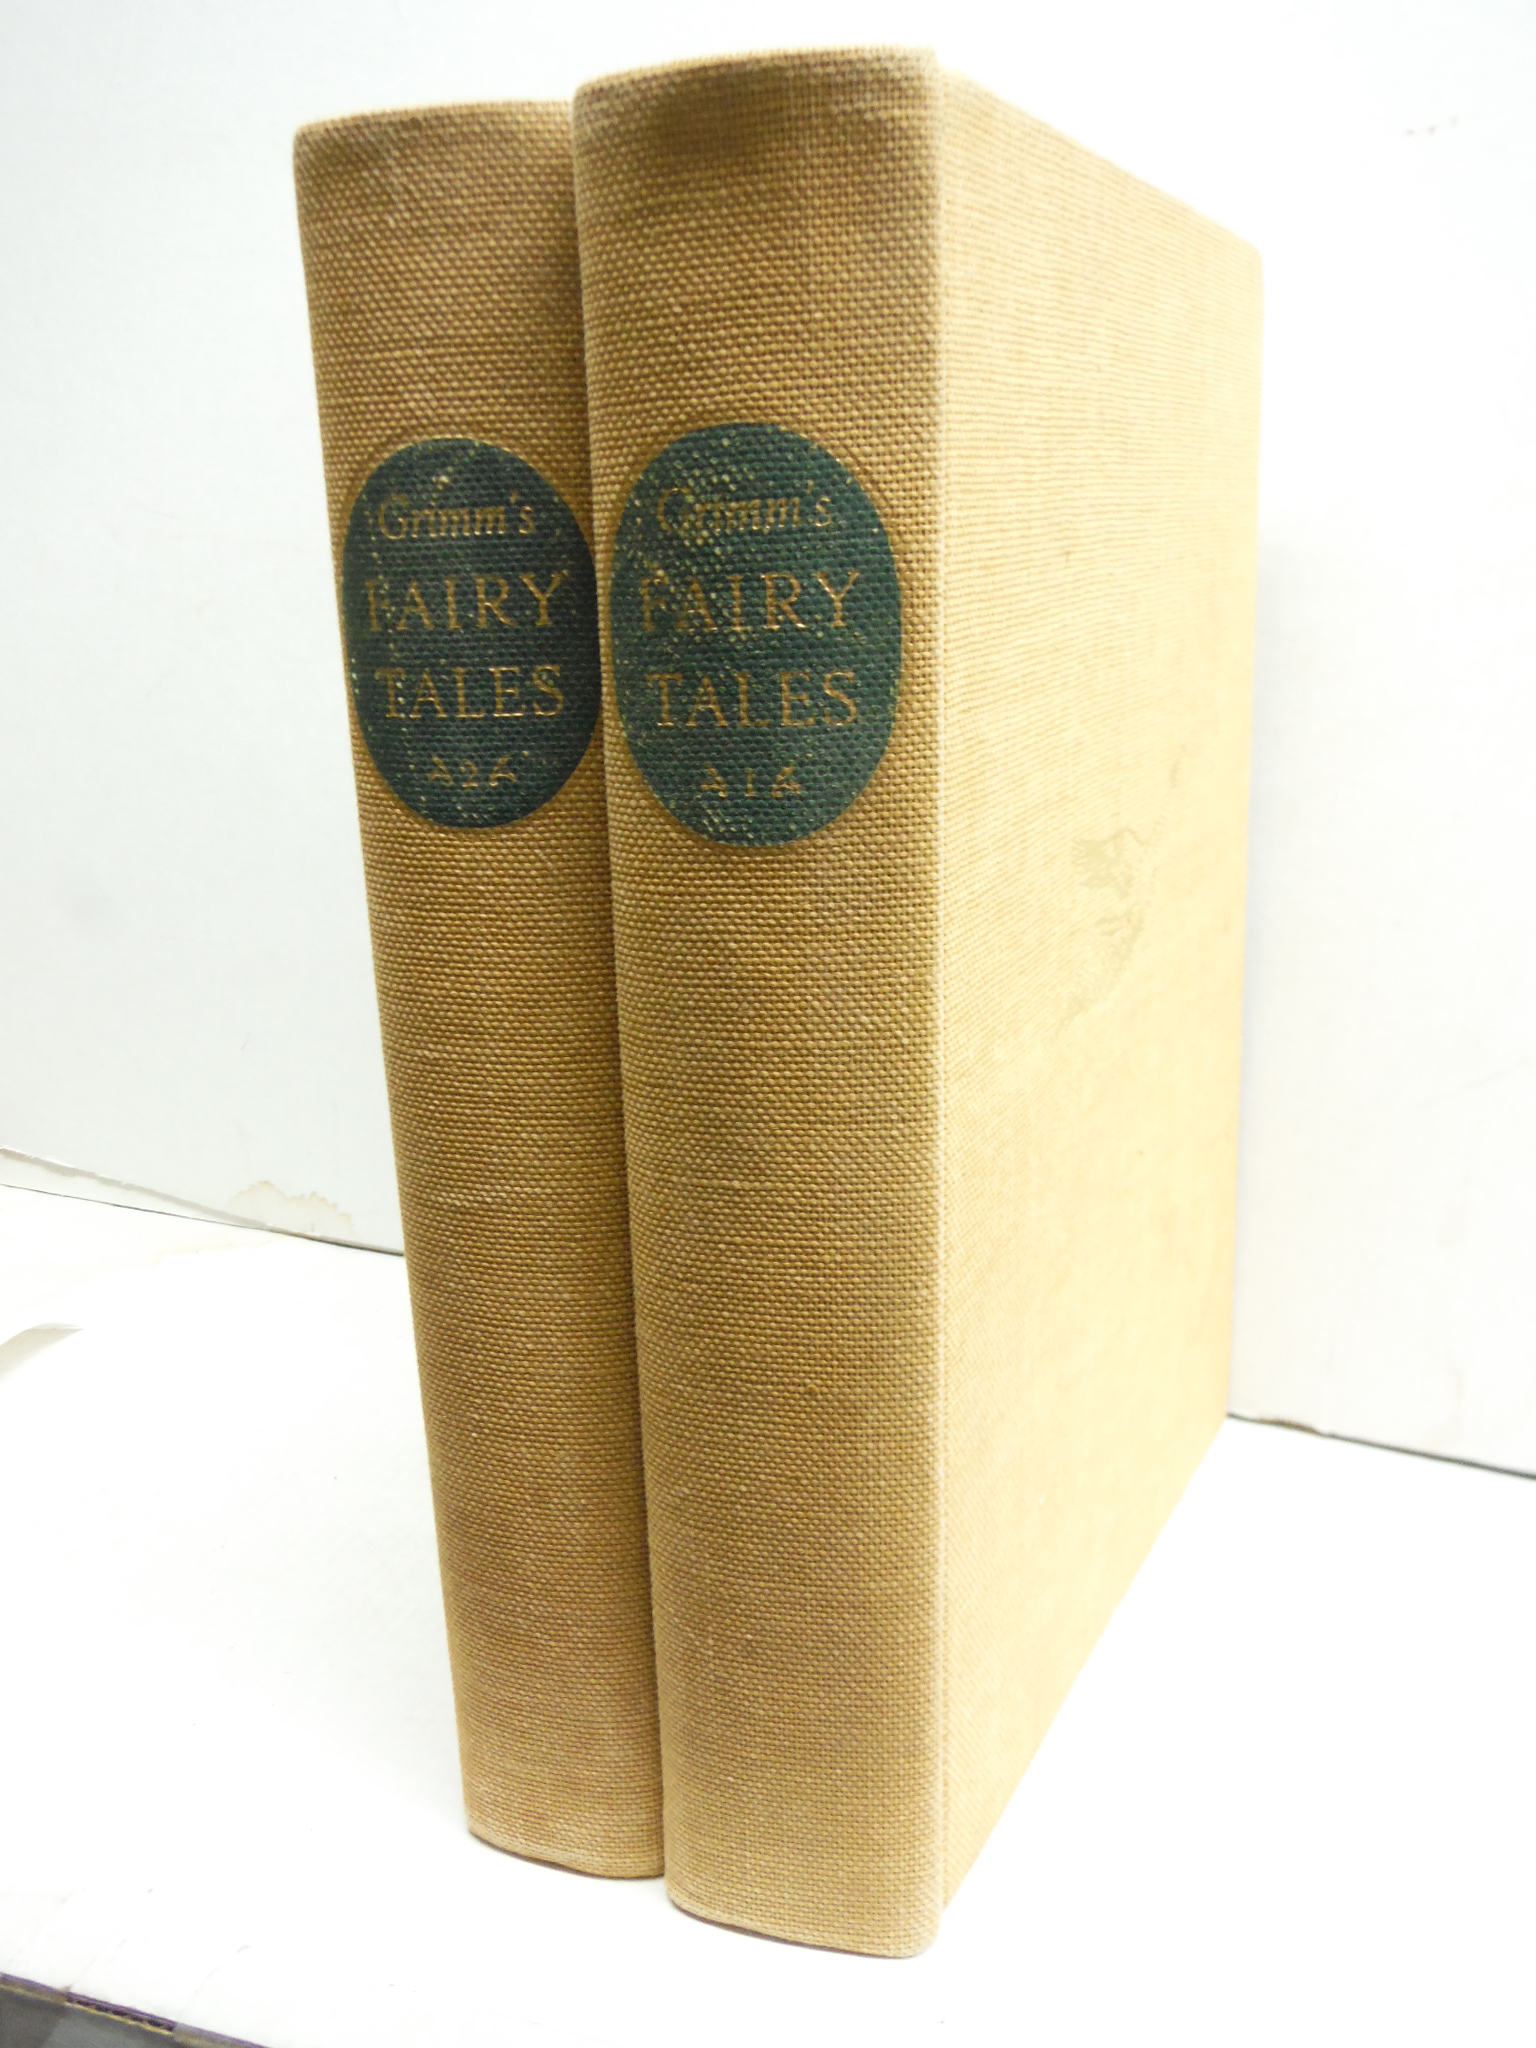 Image 0 of Grimms Fairy Tales 2 Volumes